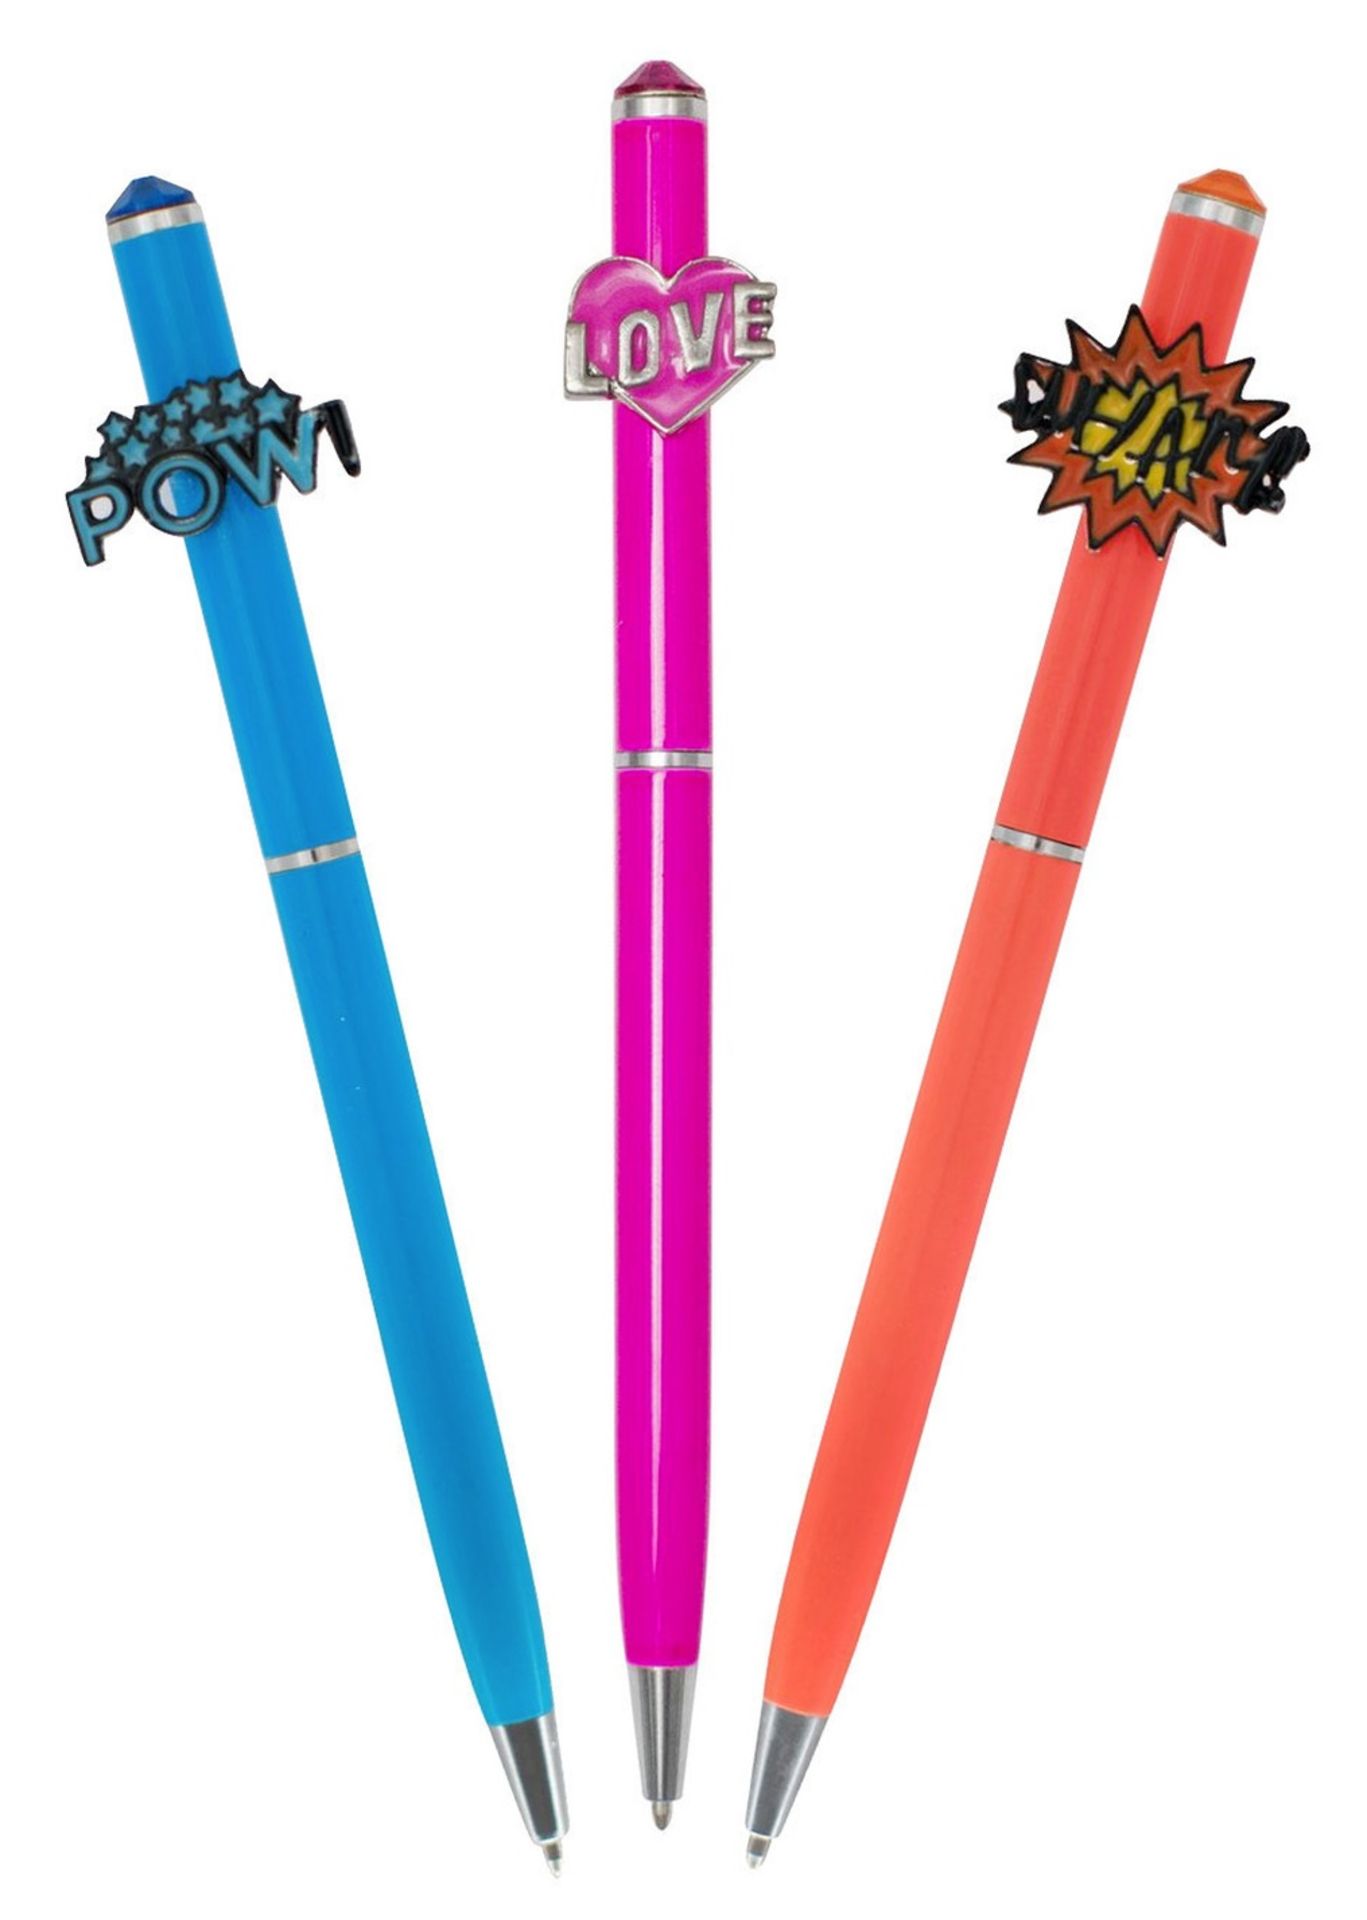 10 x ICE London 'Pop Art' Pen Set - Brand New Sealed Stock - Ideal Gifts With Great Resale Potential - Image 2 of 2